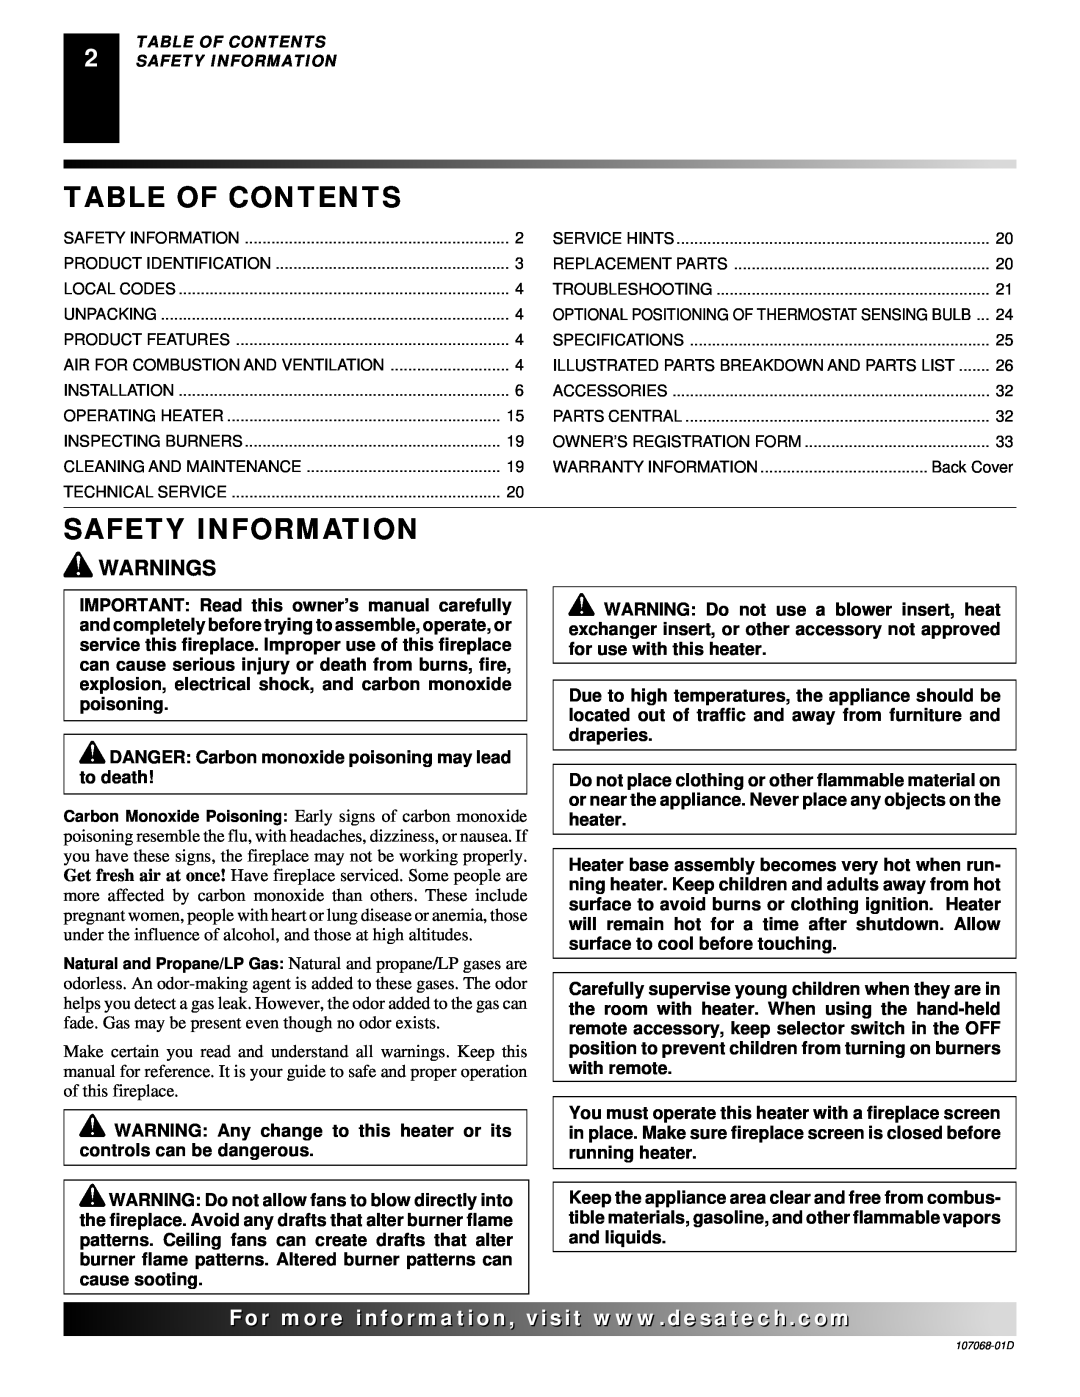 Desa CGS3124P installation manual Table Of Contents, Safety Information, Warnings 